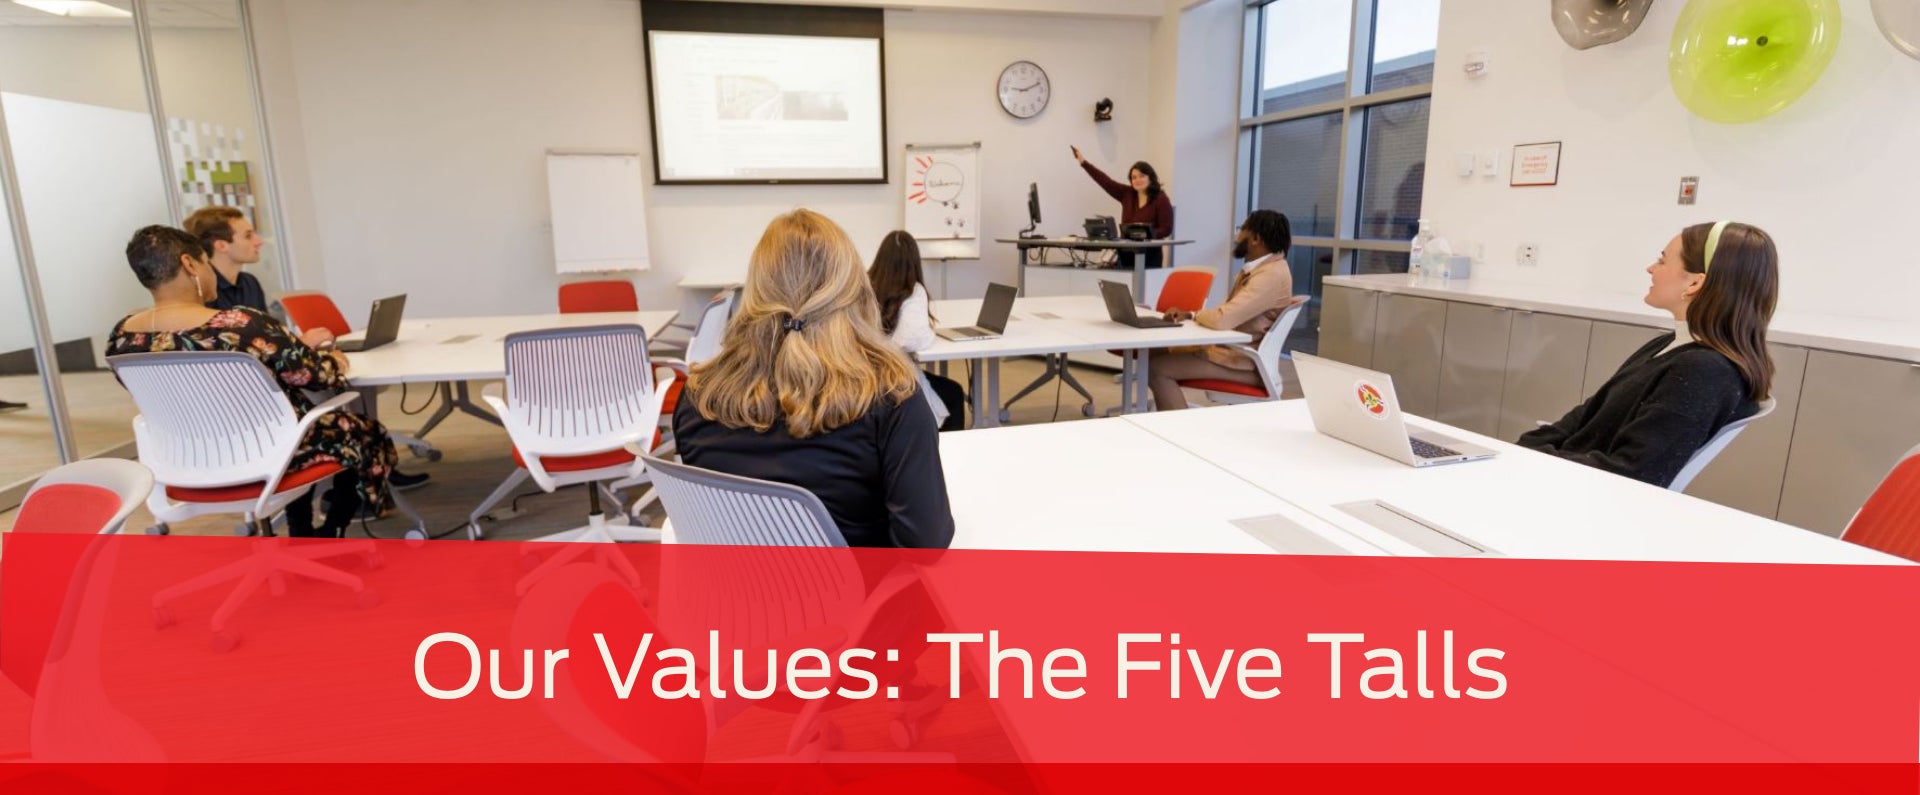 Our Value - The Five Talls